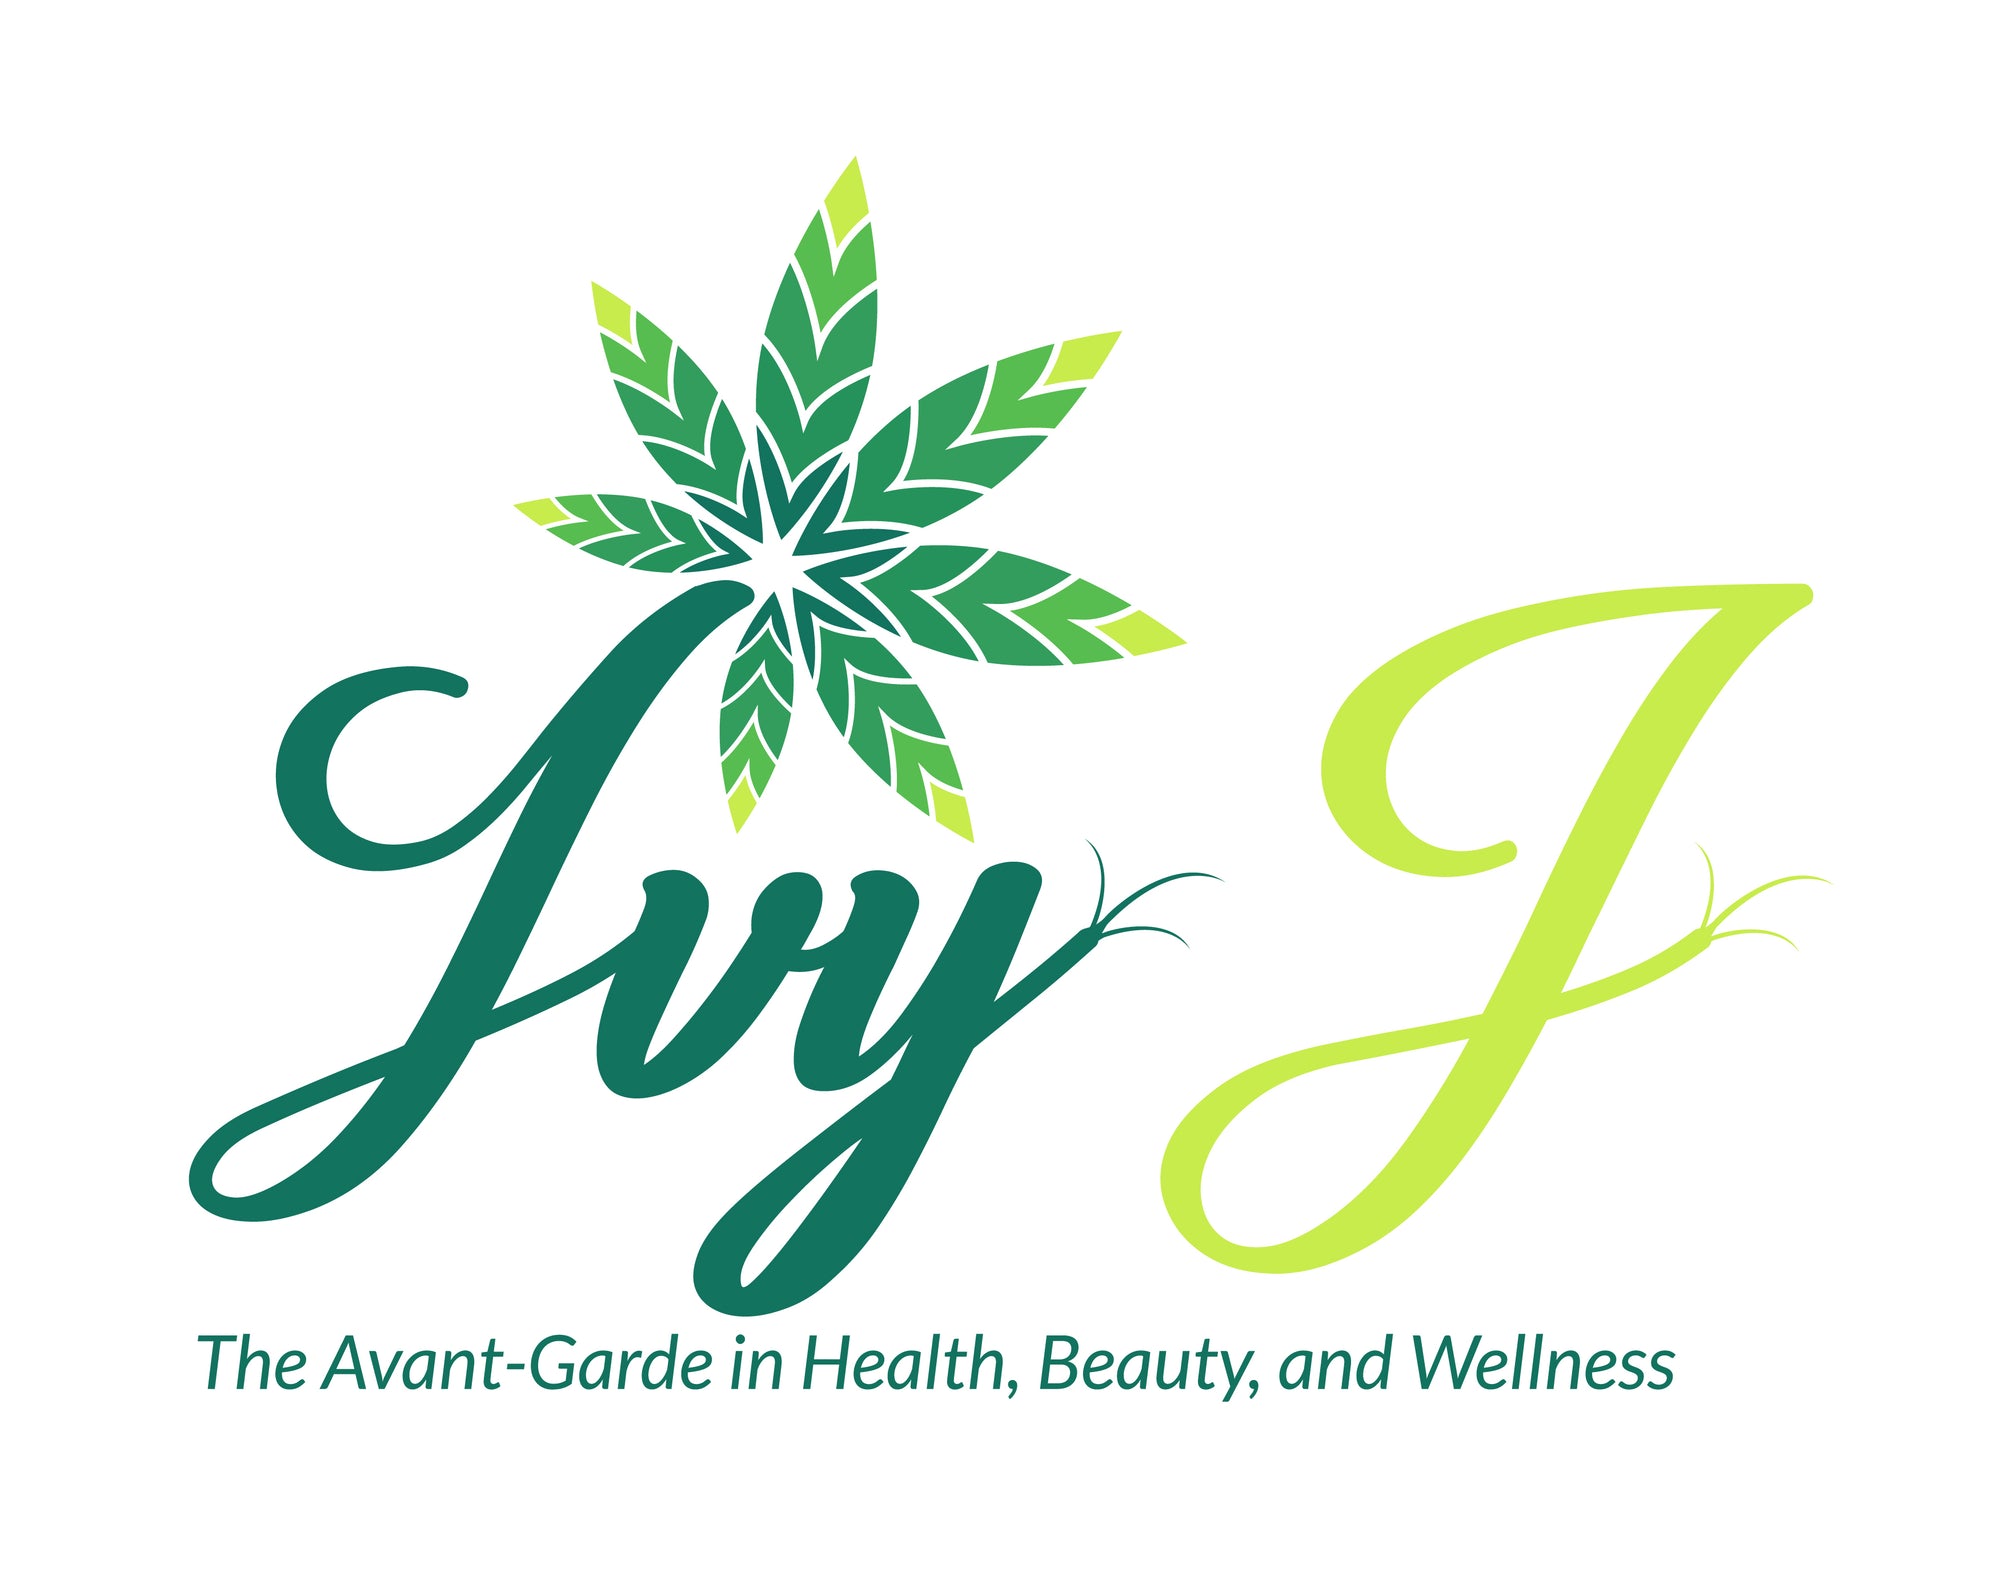 Ivy J, the Avant-Garde in Health, Beauty, and Wellness.